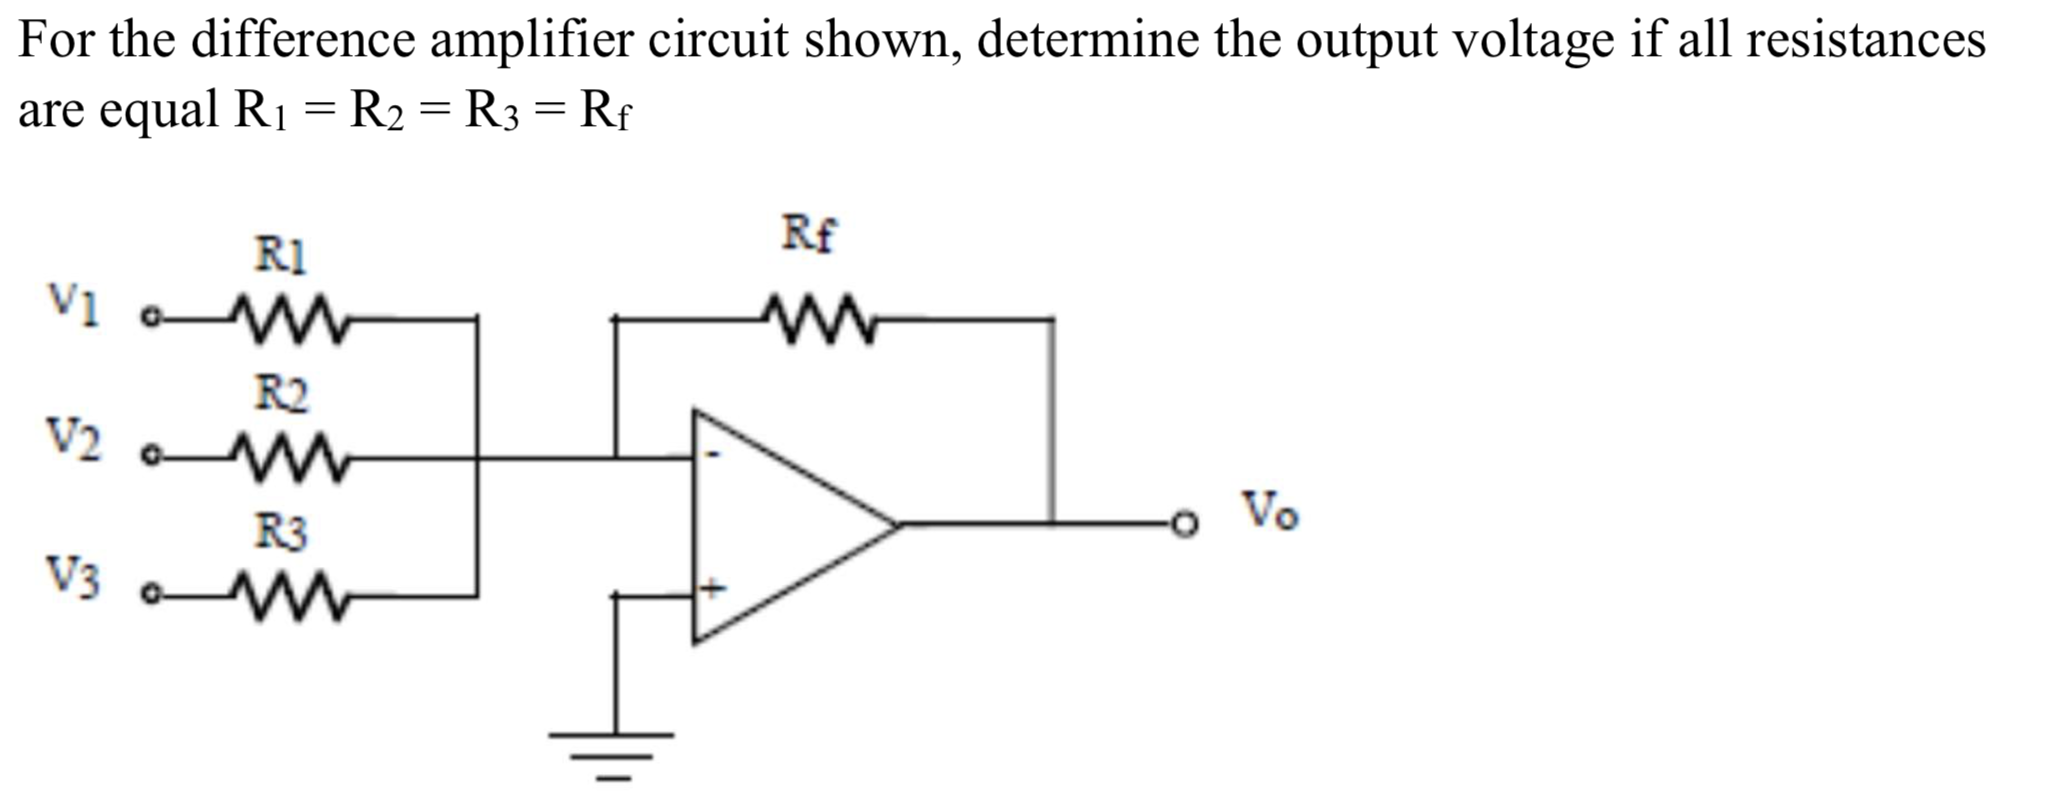 For the difference amplifier circuit shown, determine the output voltage if all resistances
are equal R1 = R2 = R3 = Rf
Rf
R1
R2
V2
Vo
R3
V3 M
